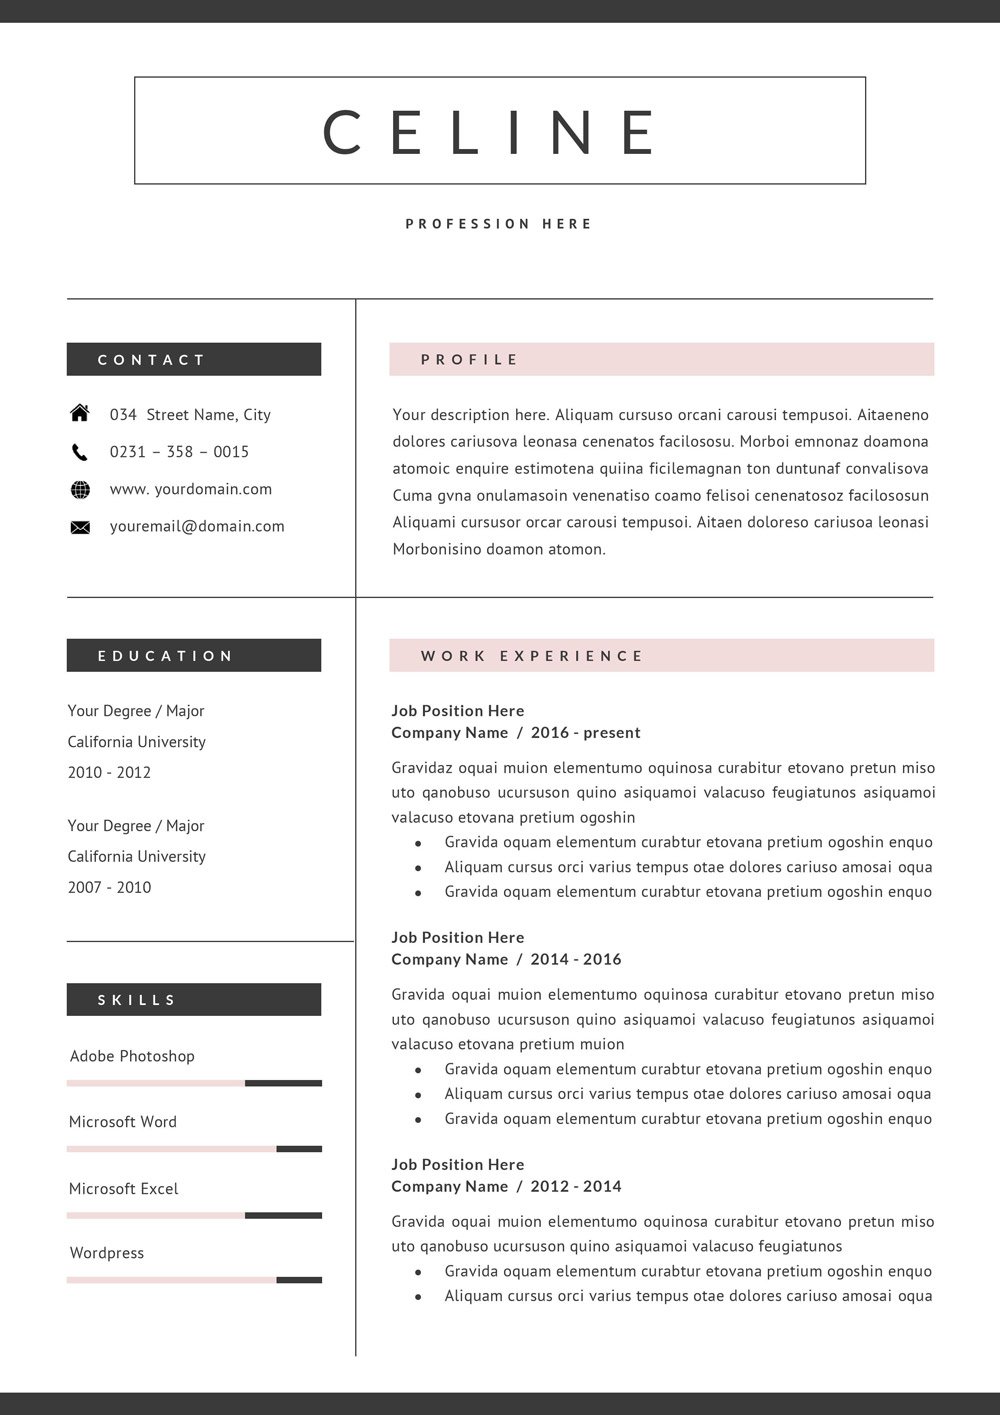 Professional resume template with a pink and black color scheme.